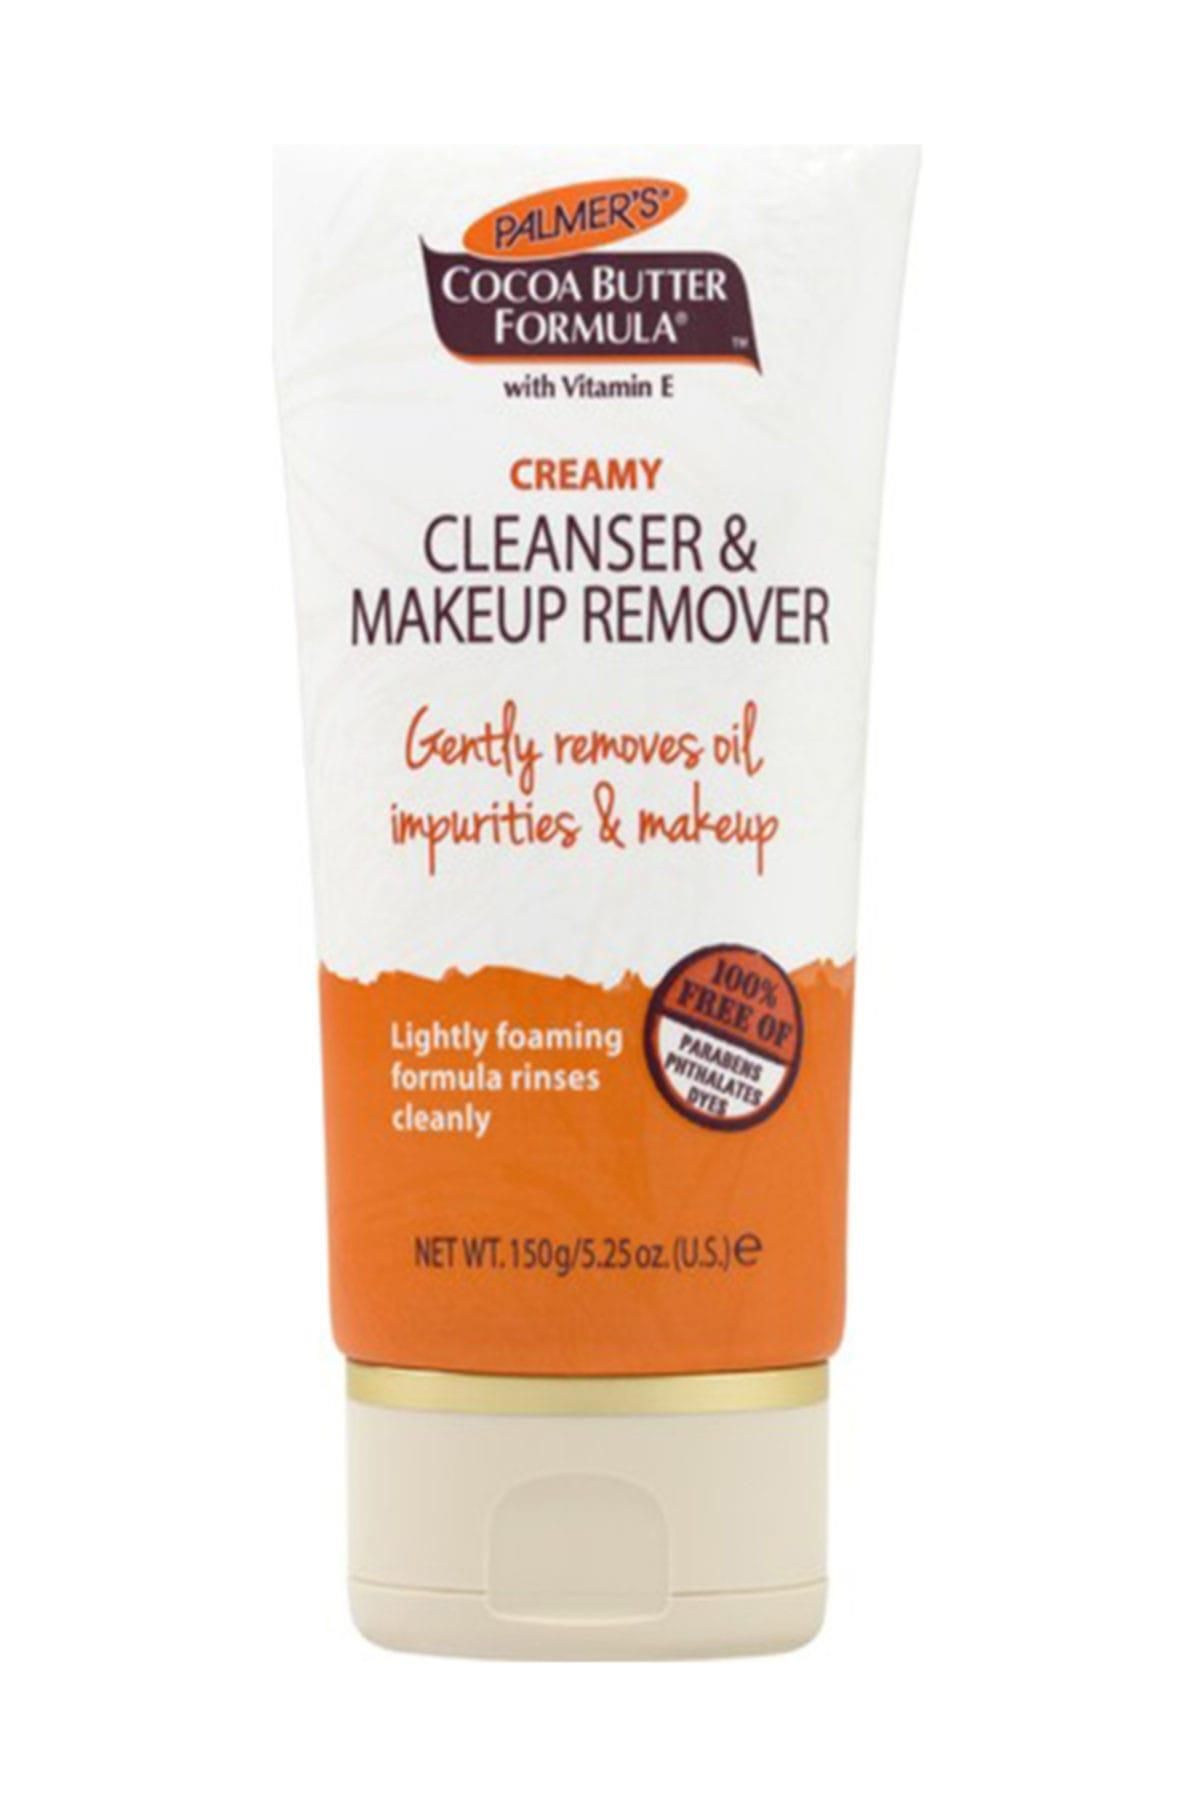 PALMER'S Cocoa Butter Cleanser & Makeup Remover Creamy 150 gr